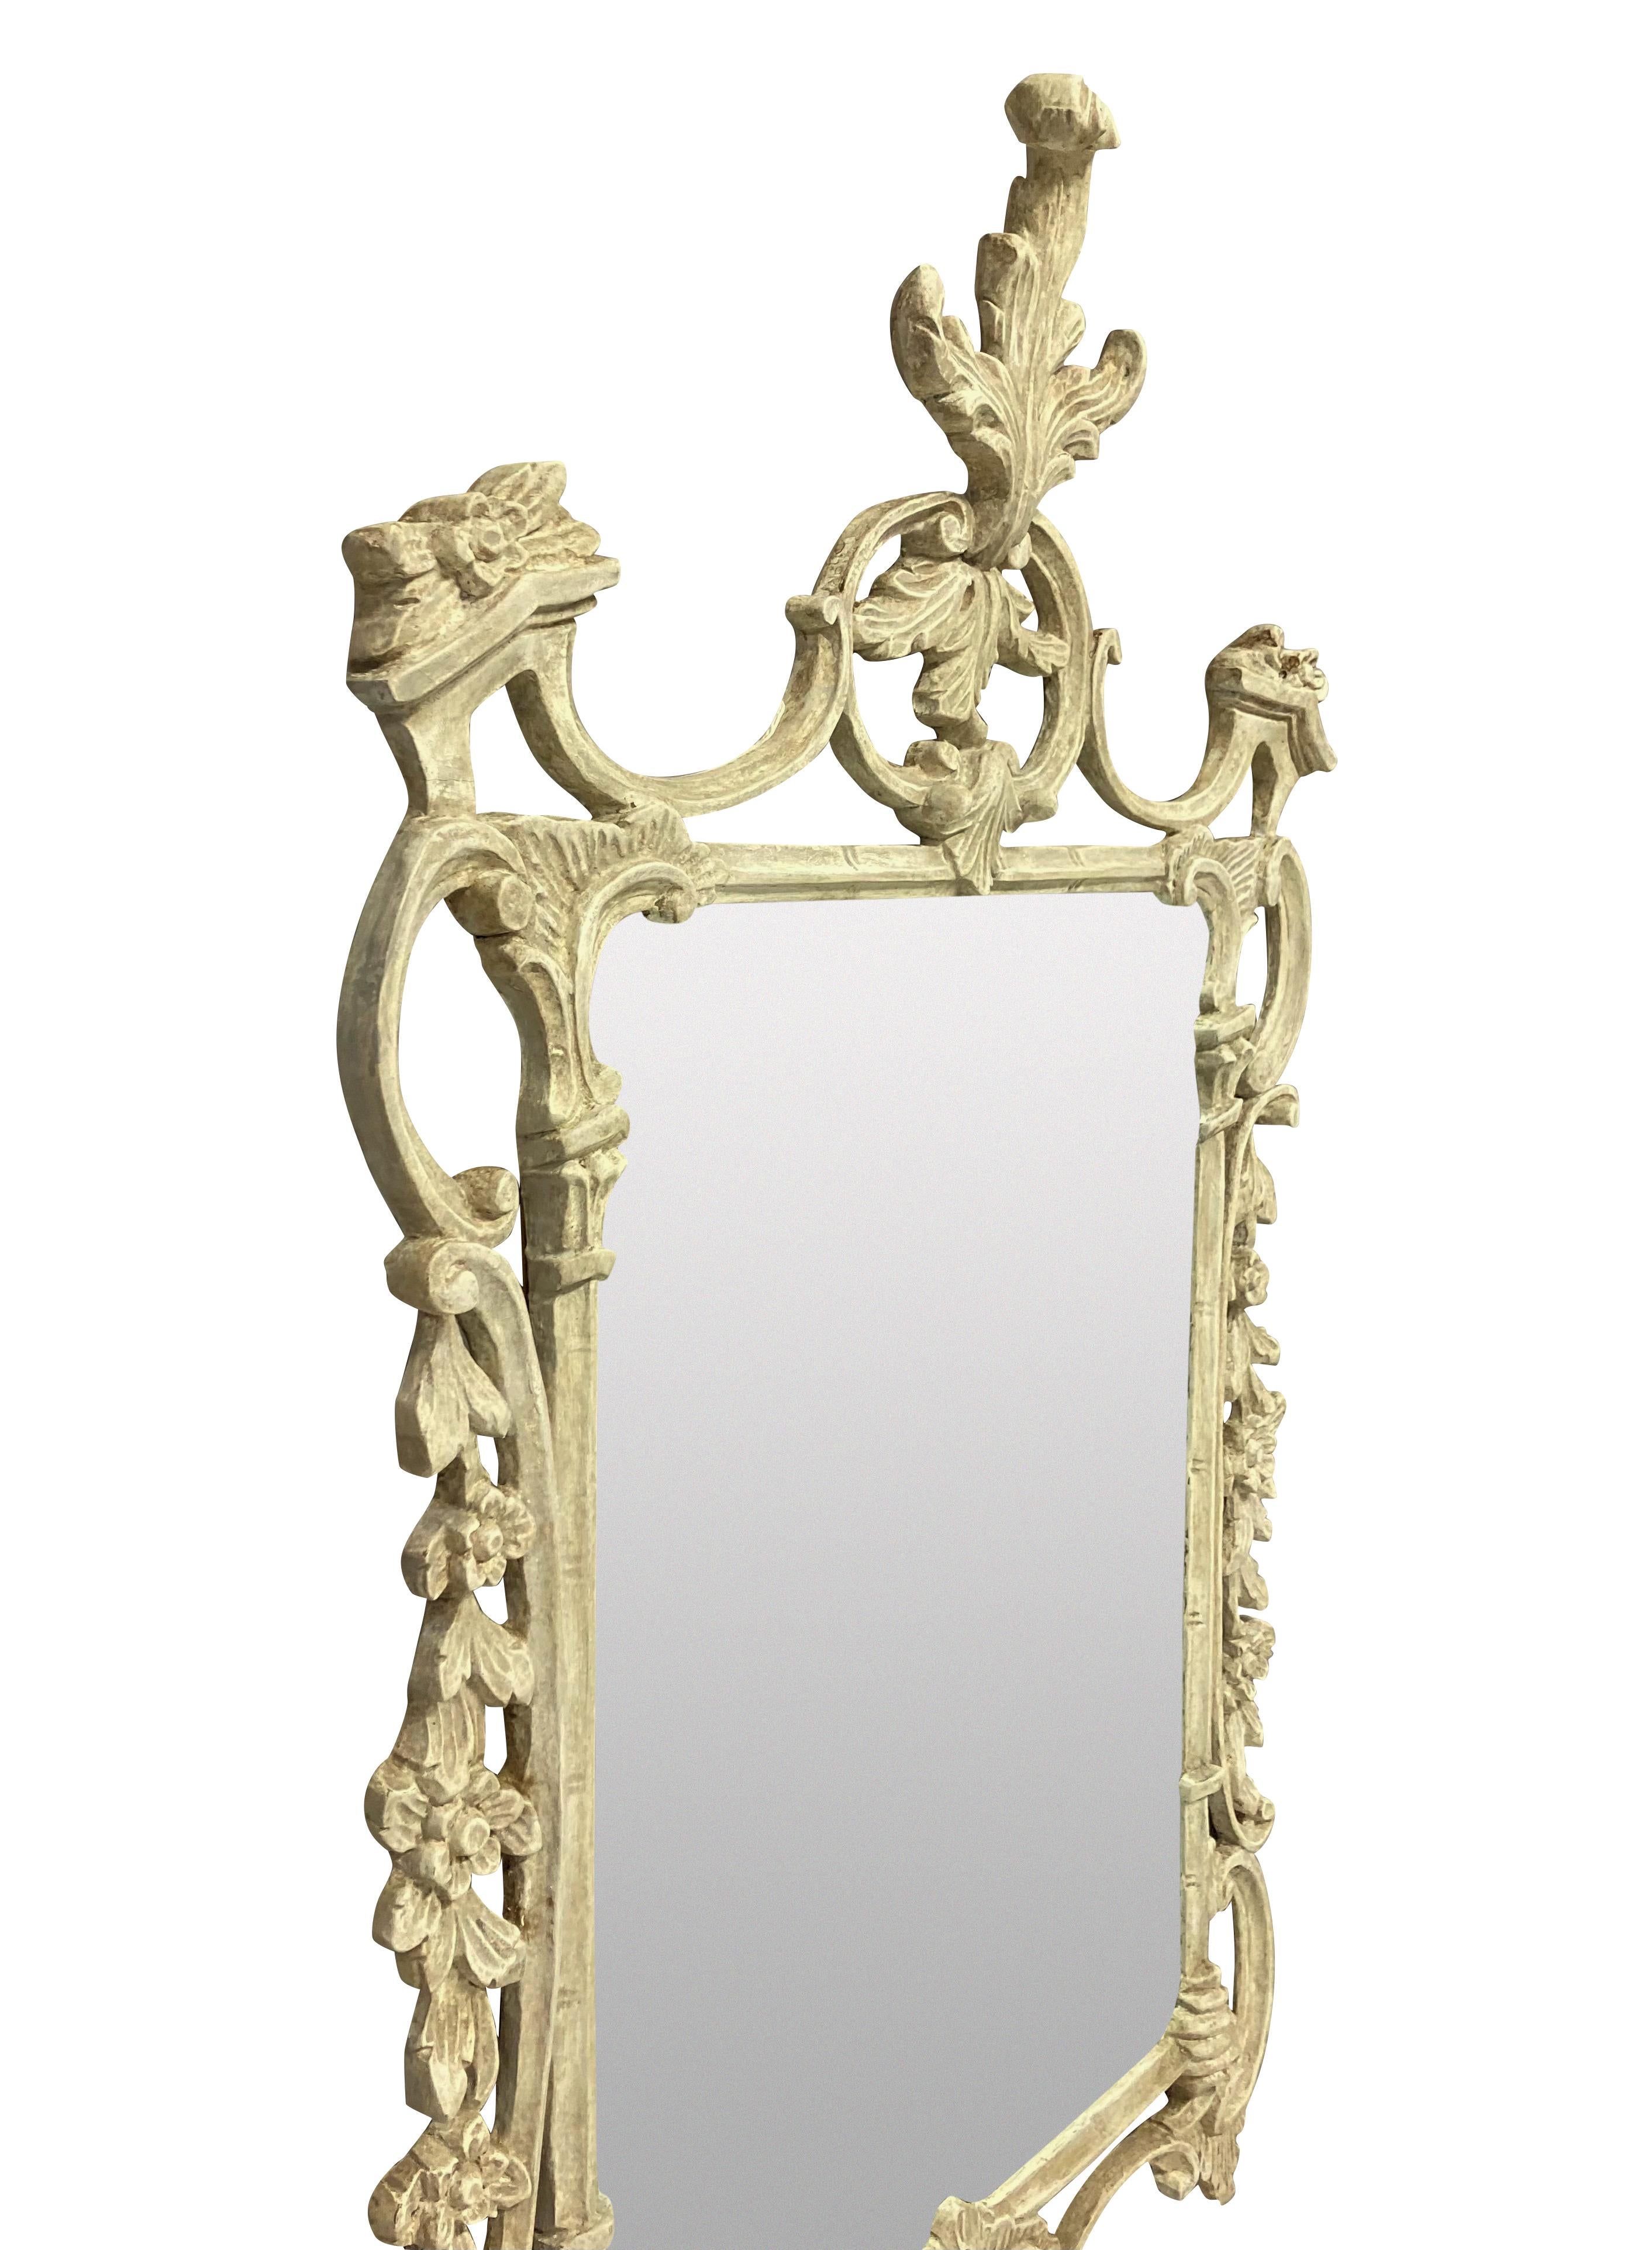 An English finely carved and painted Chippendale style mirror, in an ivory colour, with a later mirror plate.